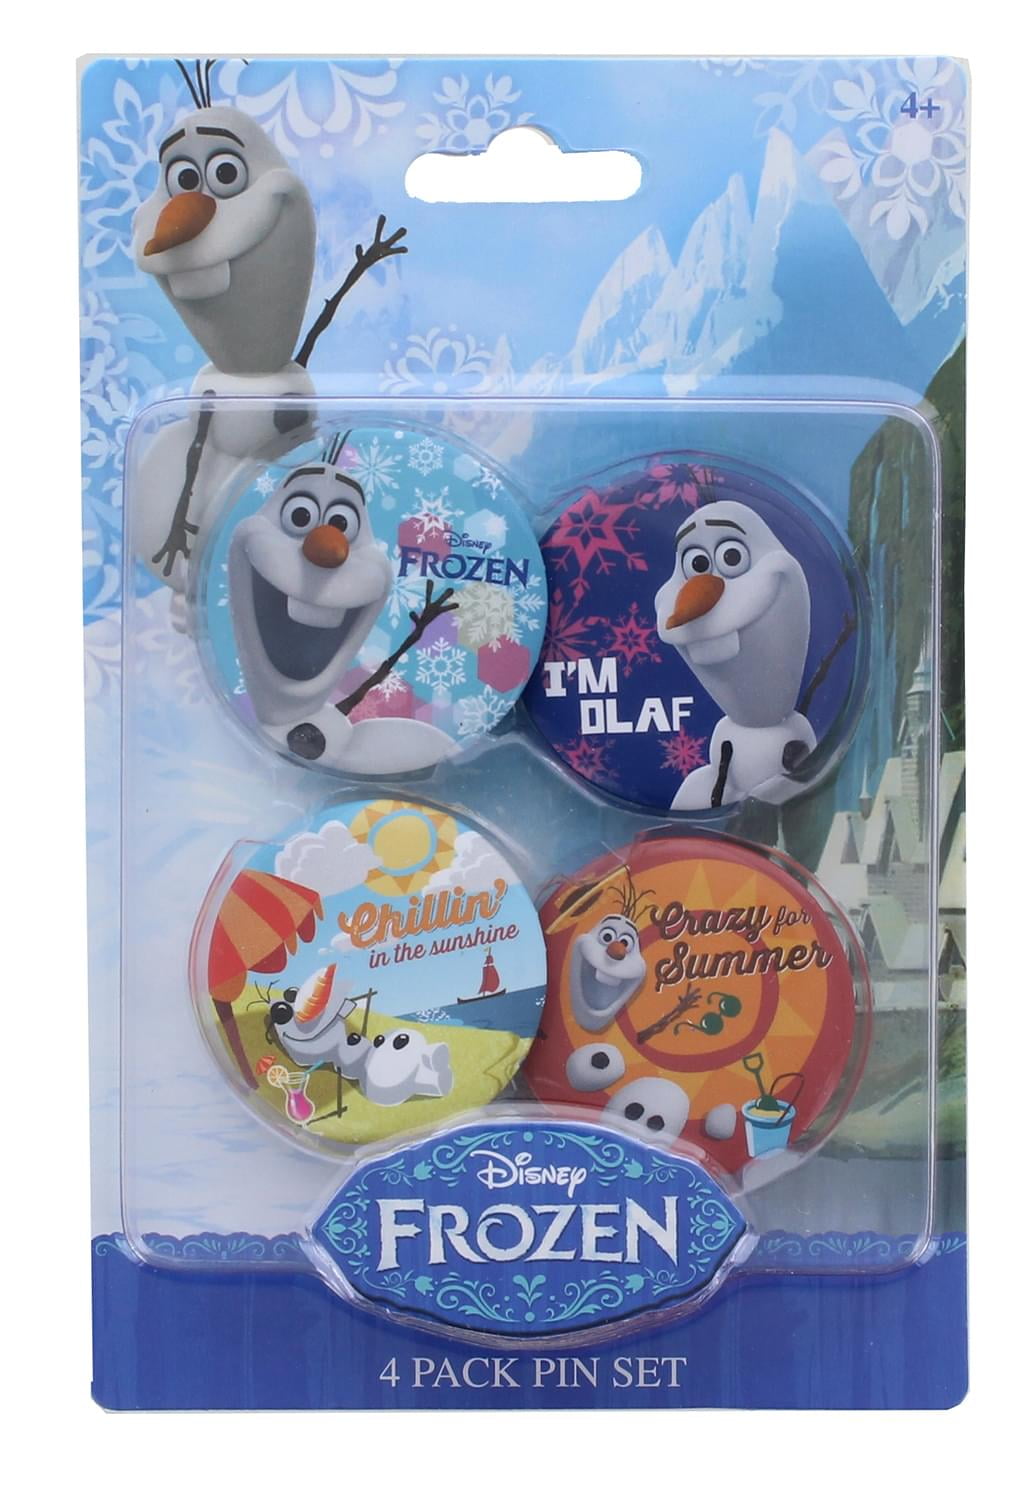 Frozen Olaf All My Best Friends are Flakes Jeweled Disney Pin 112058